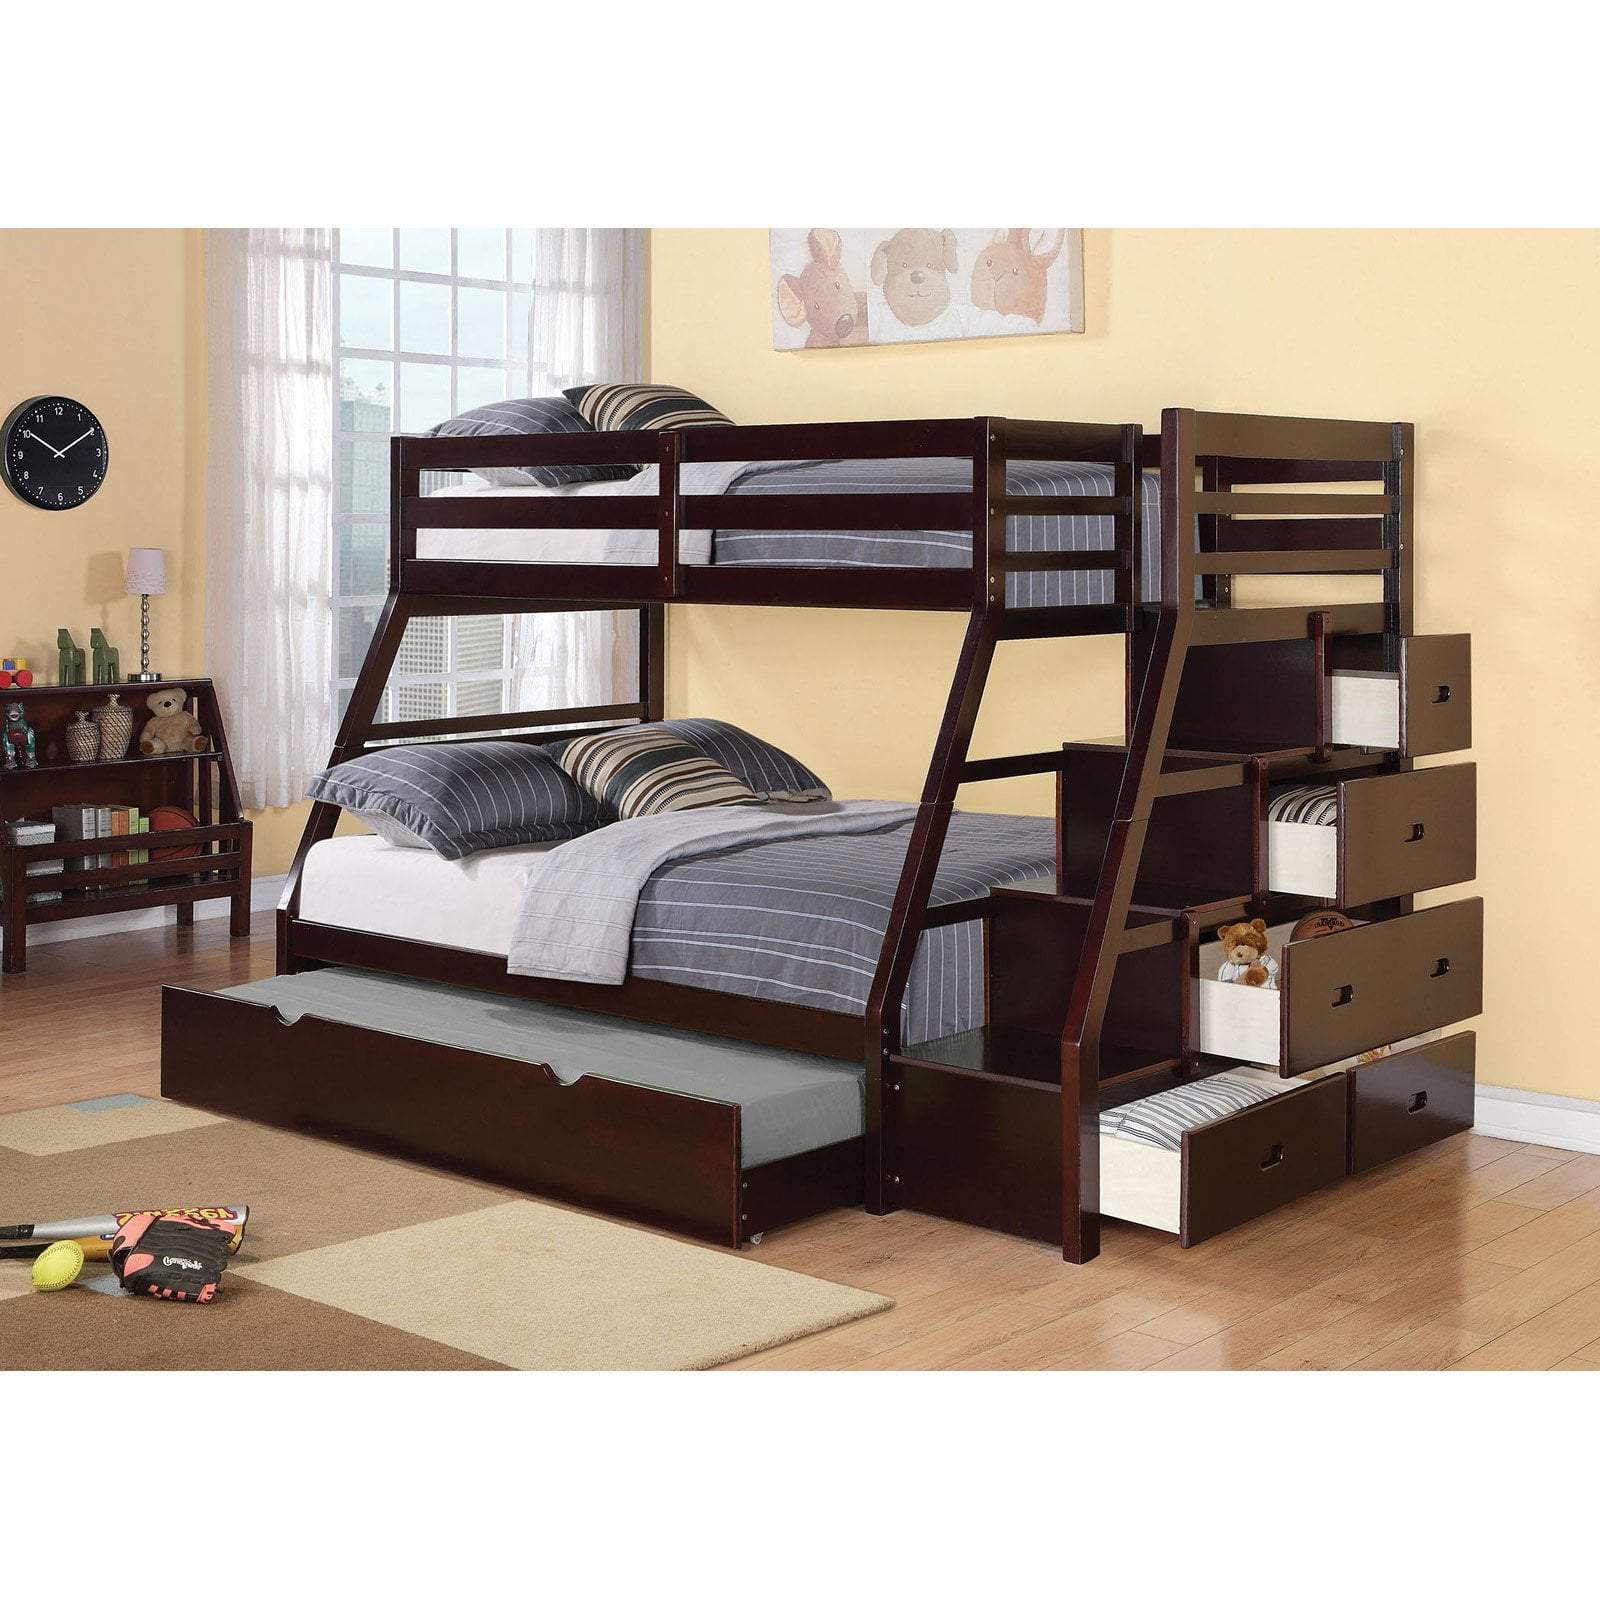 Acme Furniture Jason Twin Over Full, Your Zone Twin Over Full Bunk Bed Walnut